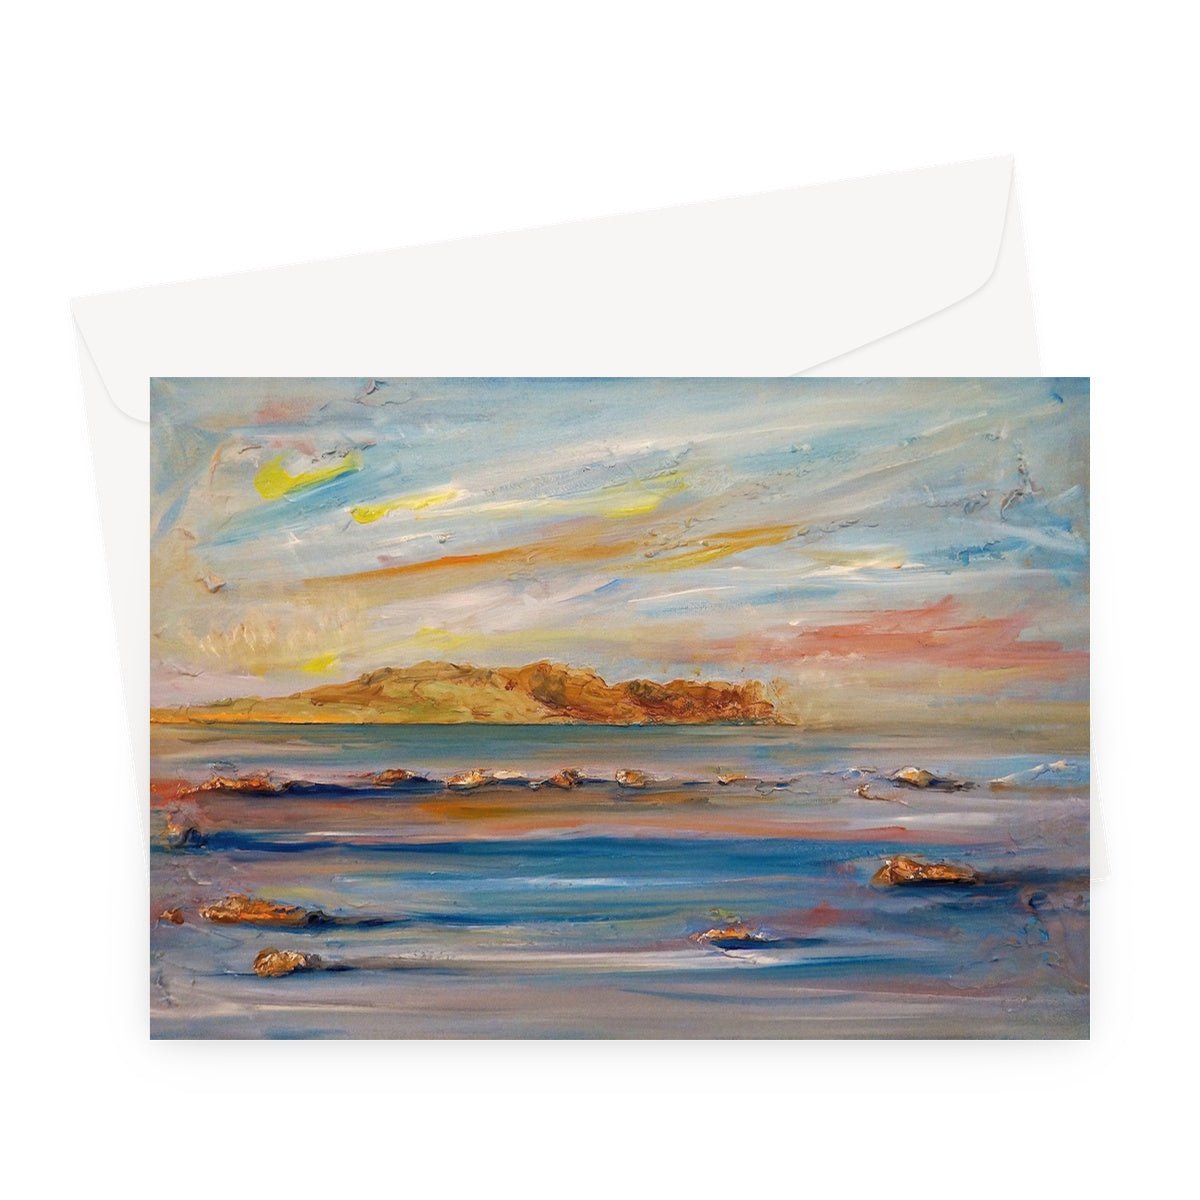 Tiree Dawn Art Gifts Greeting Card-Greetings Cards-Hebridean Islands Art Gallery-A5 Landscape-10 Cards-Paintings, Prints, Homeware, Art Gifts From Scotland By Scottish Artist Kevin Hunter